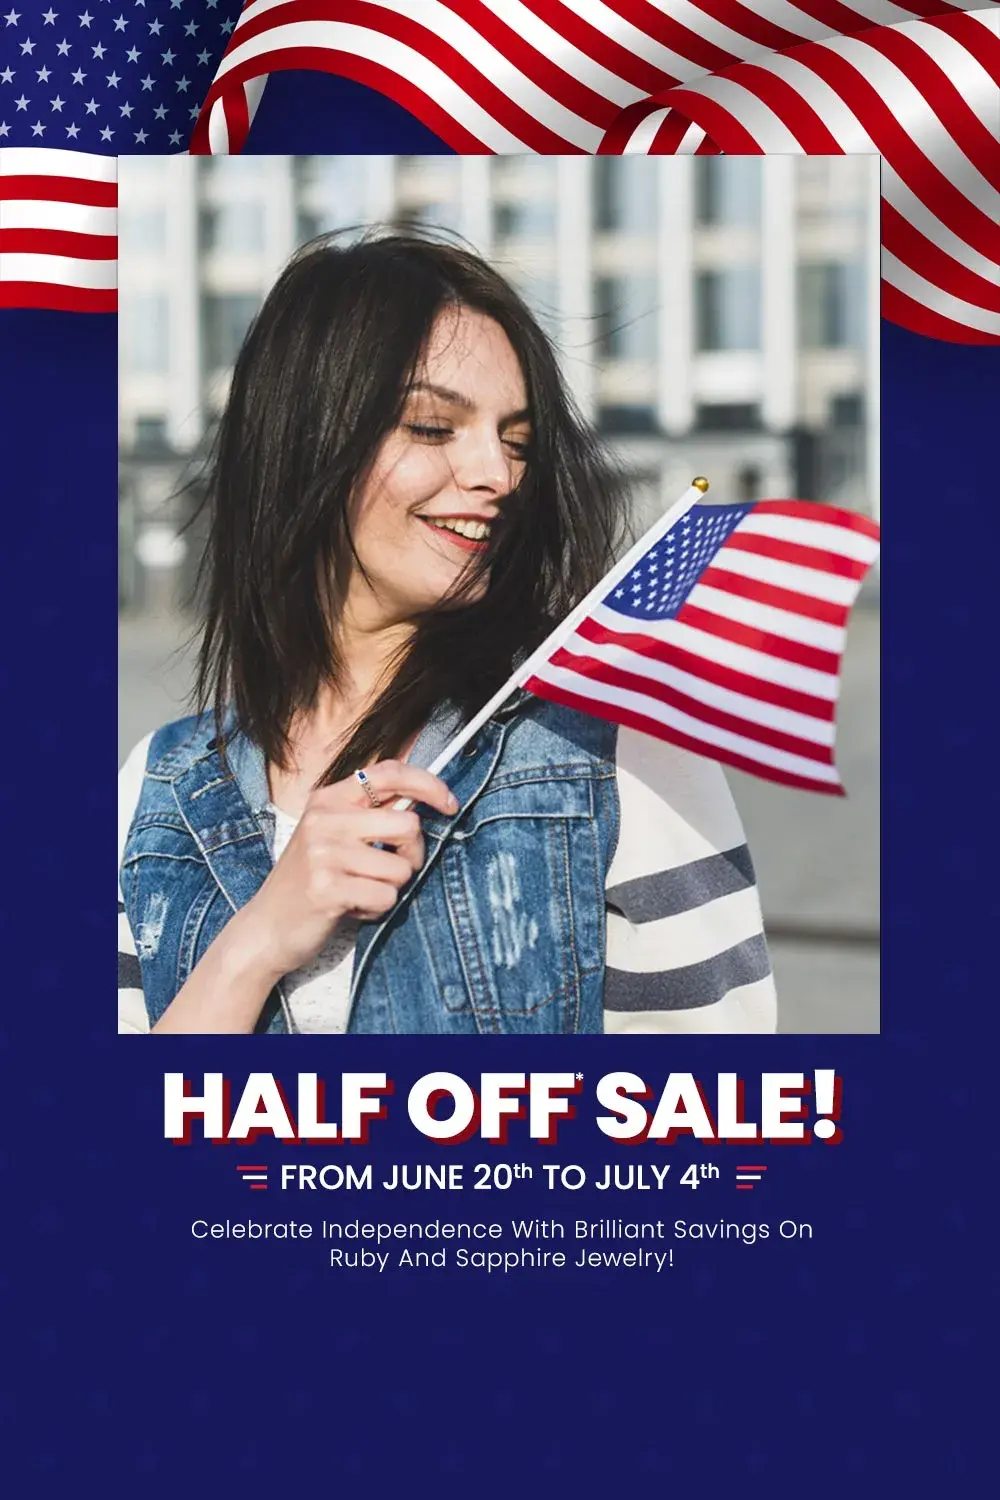 Celebrate Independence With Brilliant Savings At M & M Jewelers